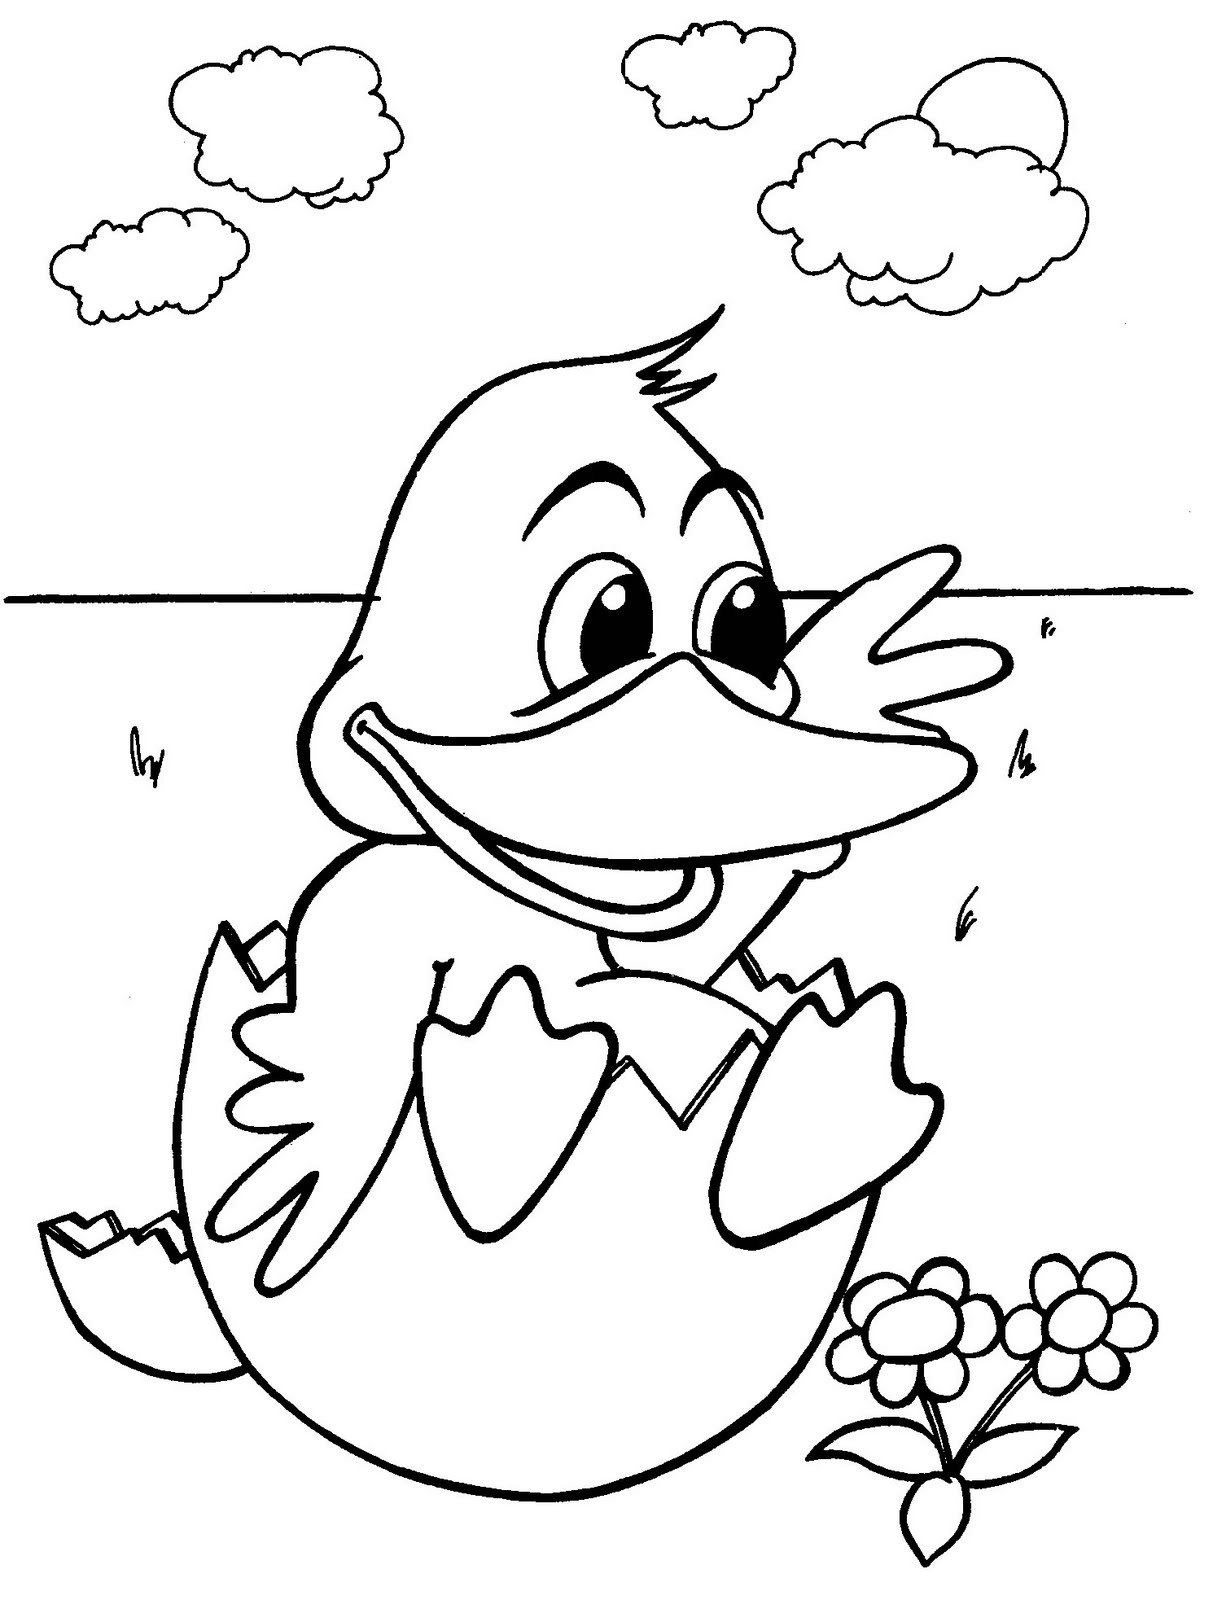  Baby Duck Coloring Pages of Animals